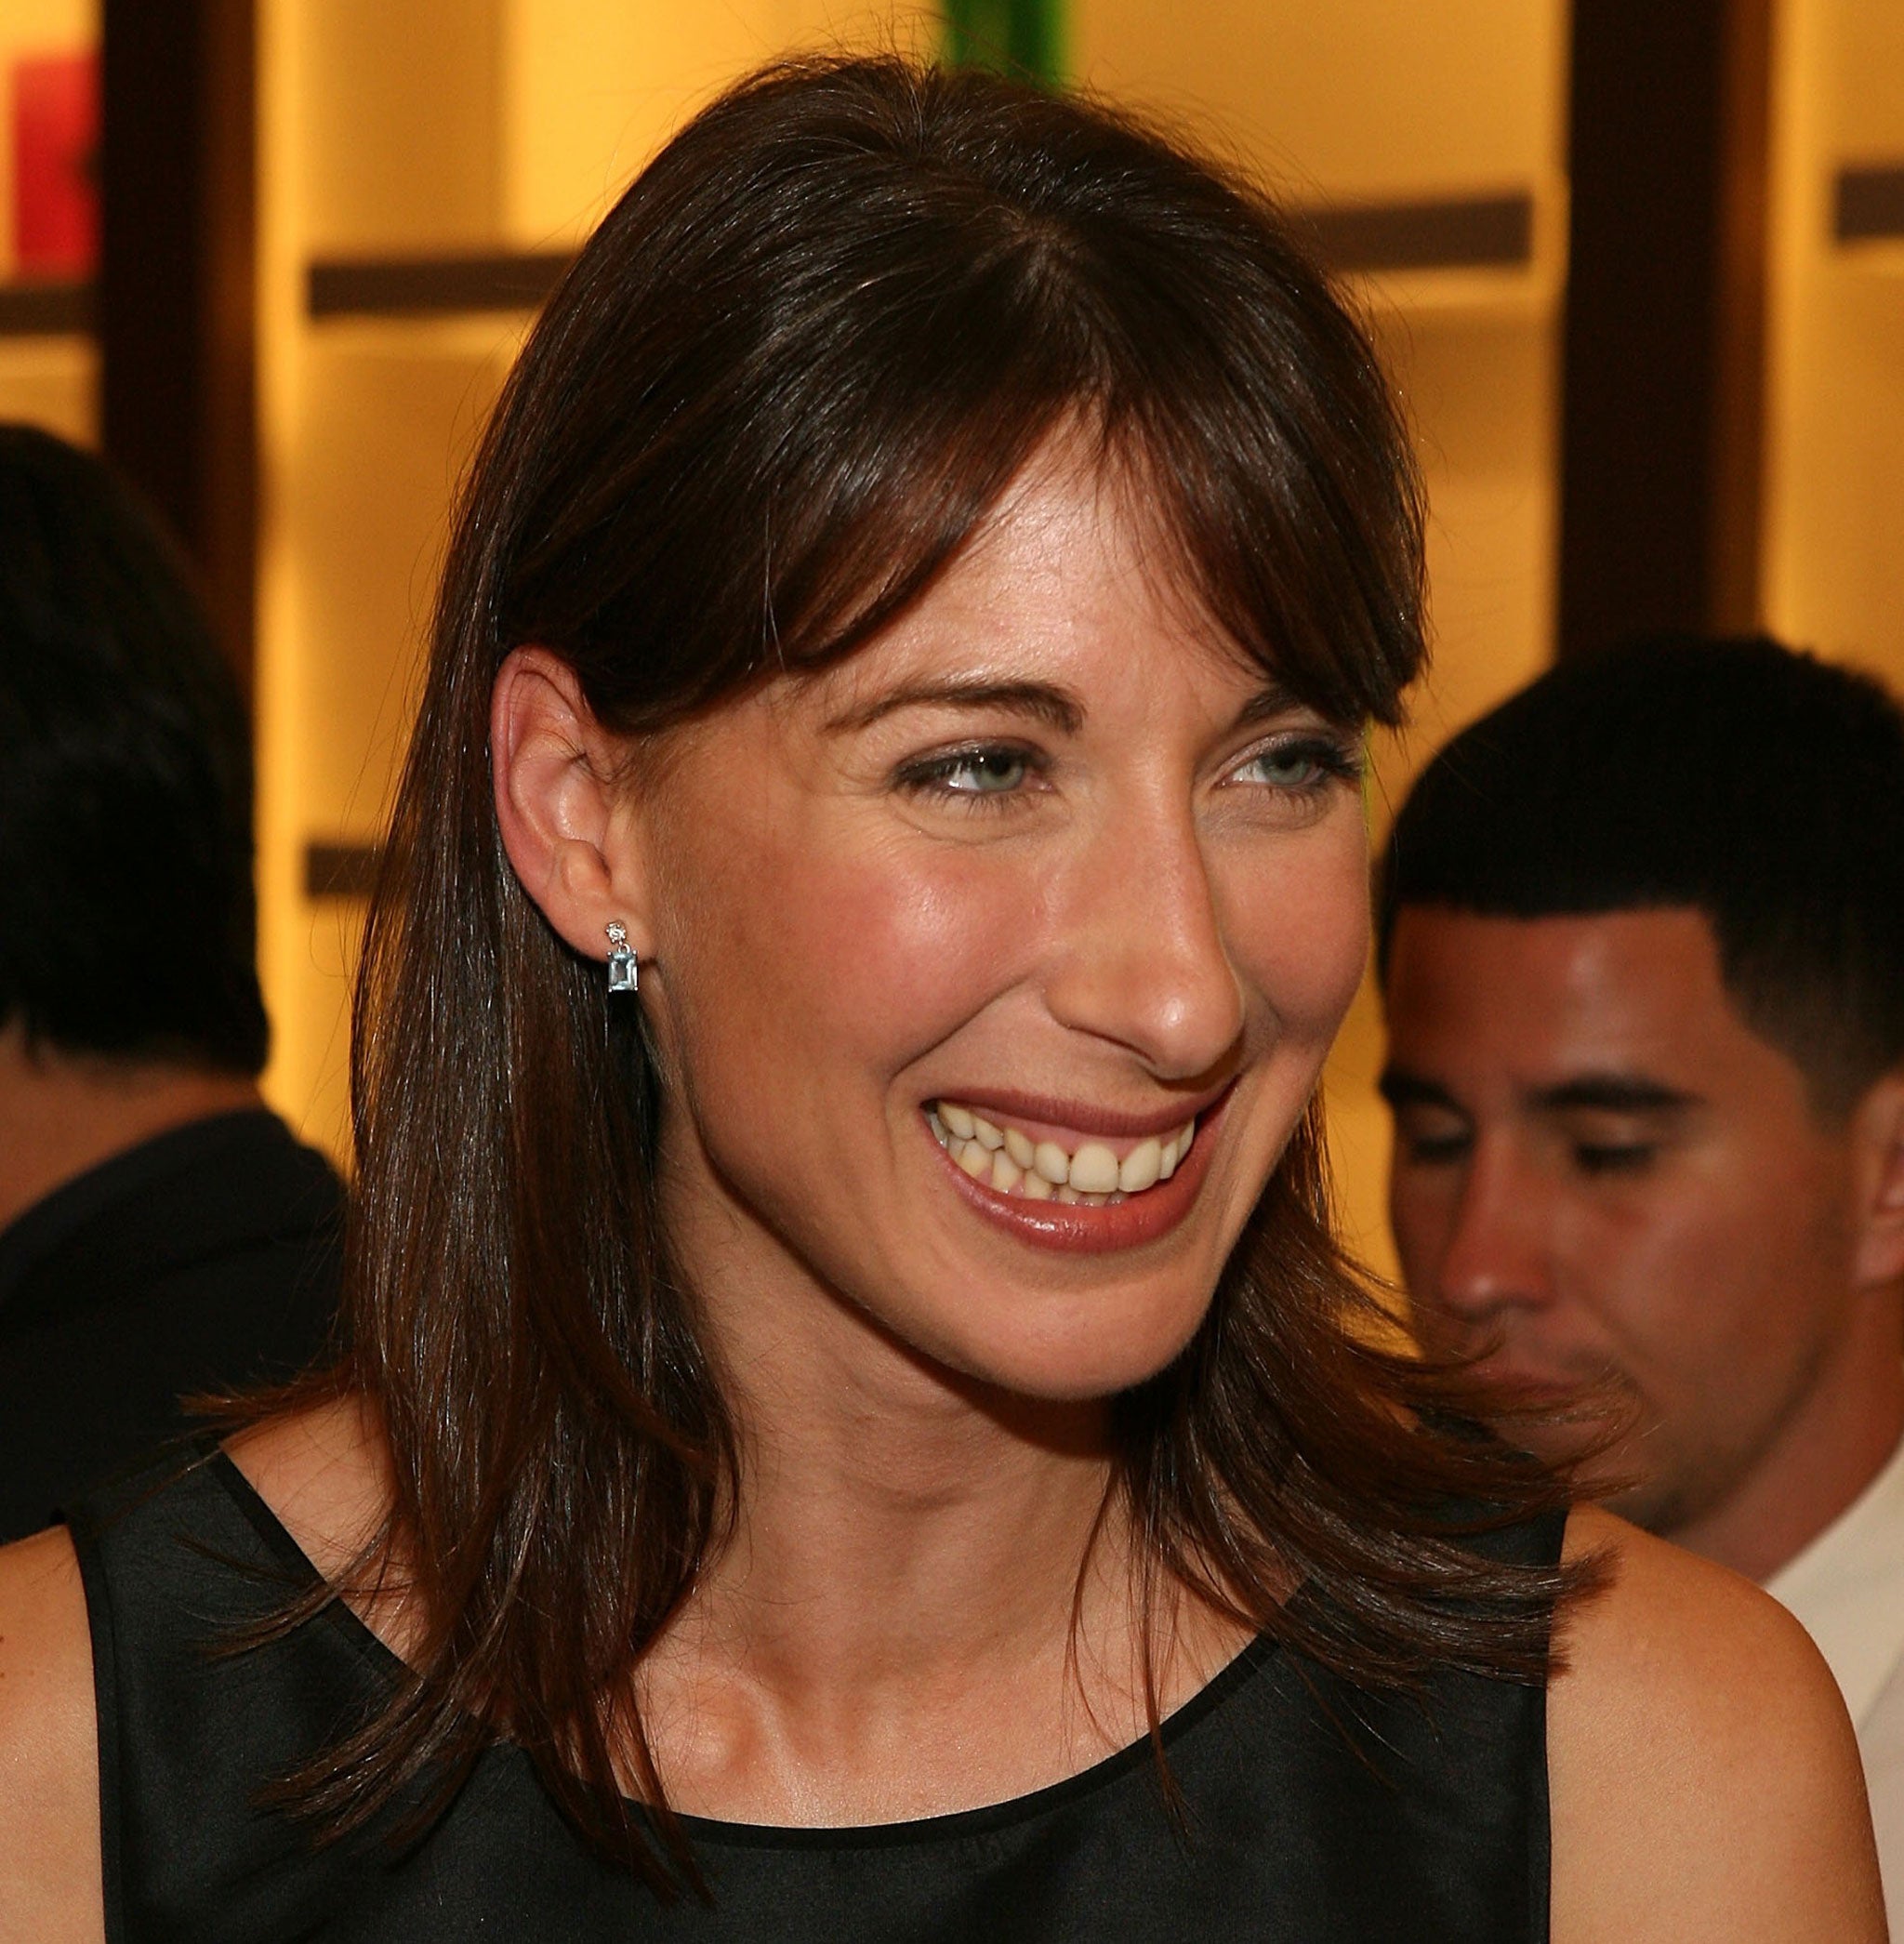 Samantha Cameron pictured at the Smythson, Rodeo Drive store launch party on 26 September, 2007, in Beverly Hills, California